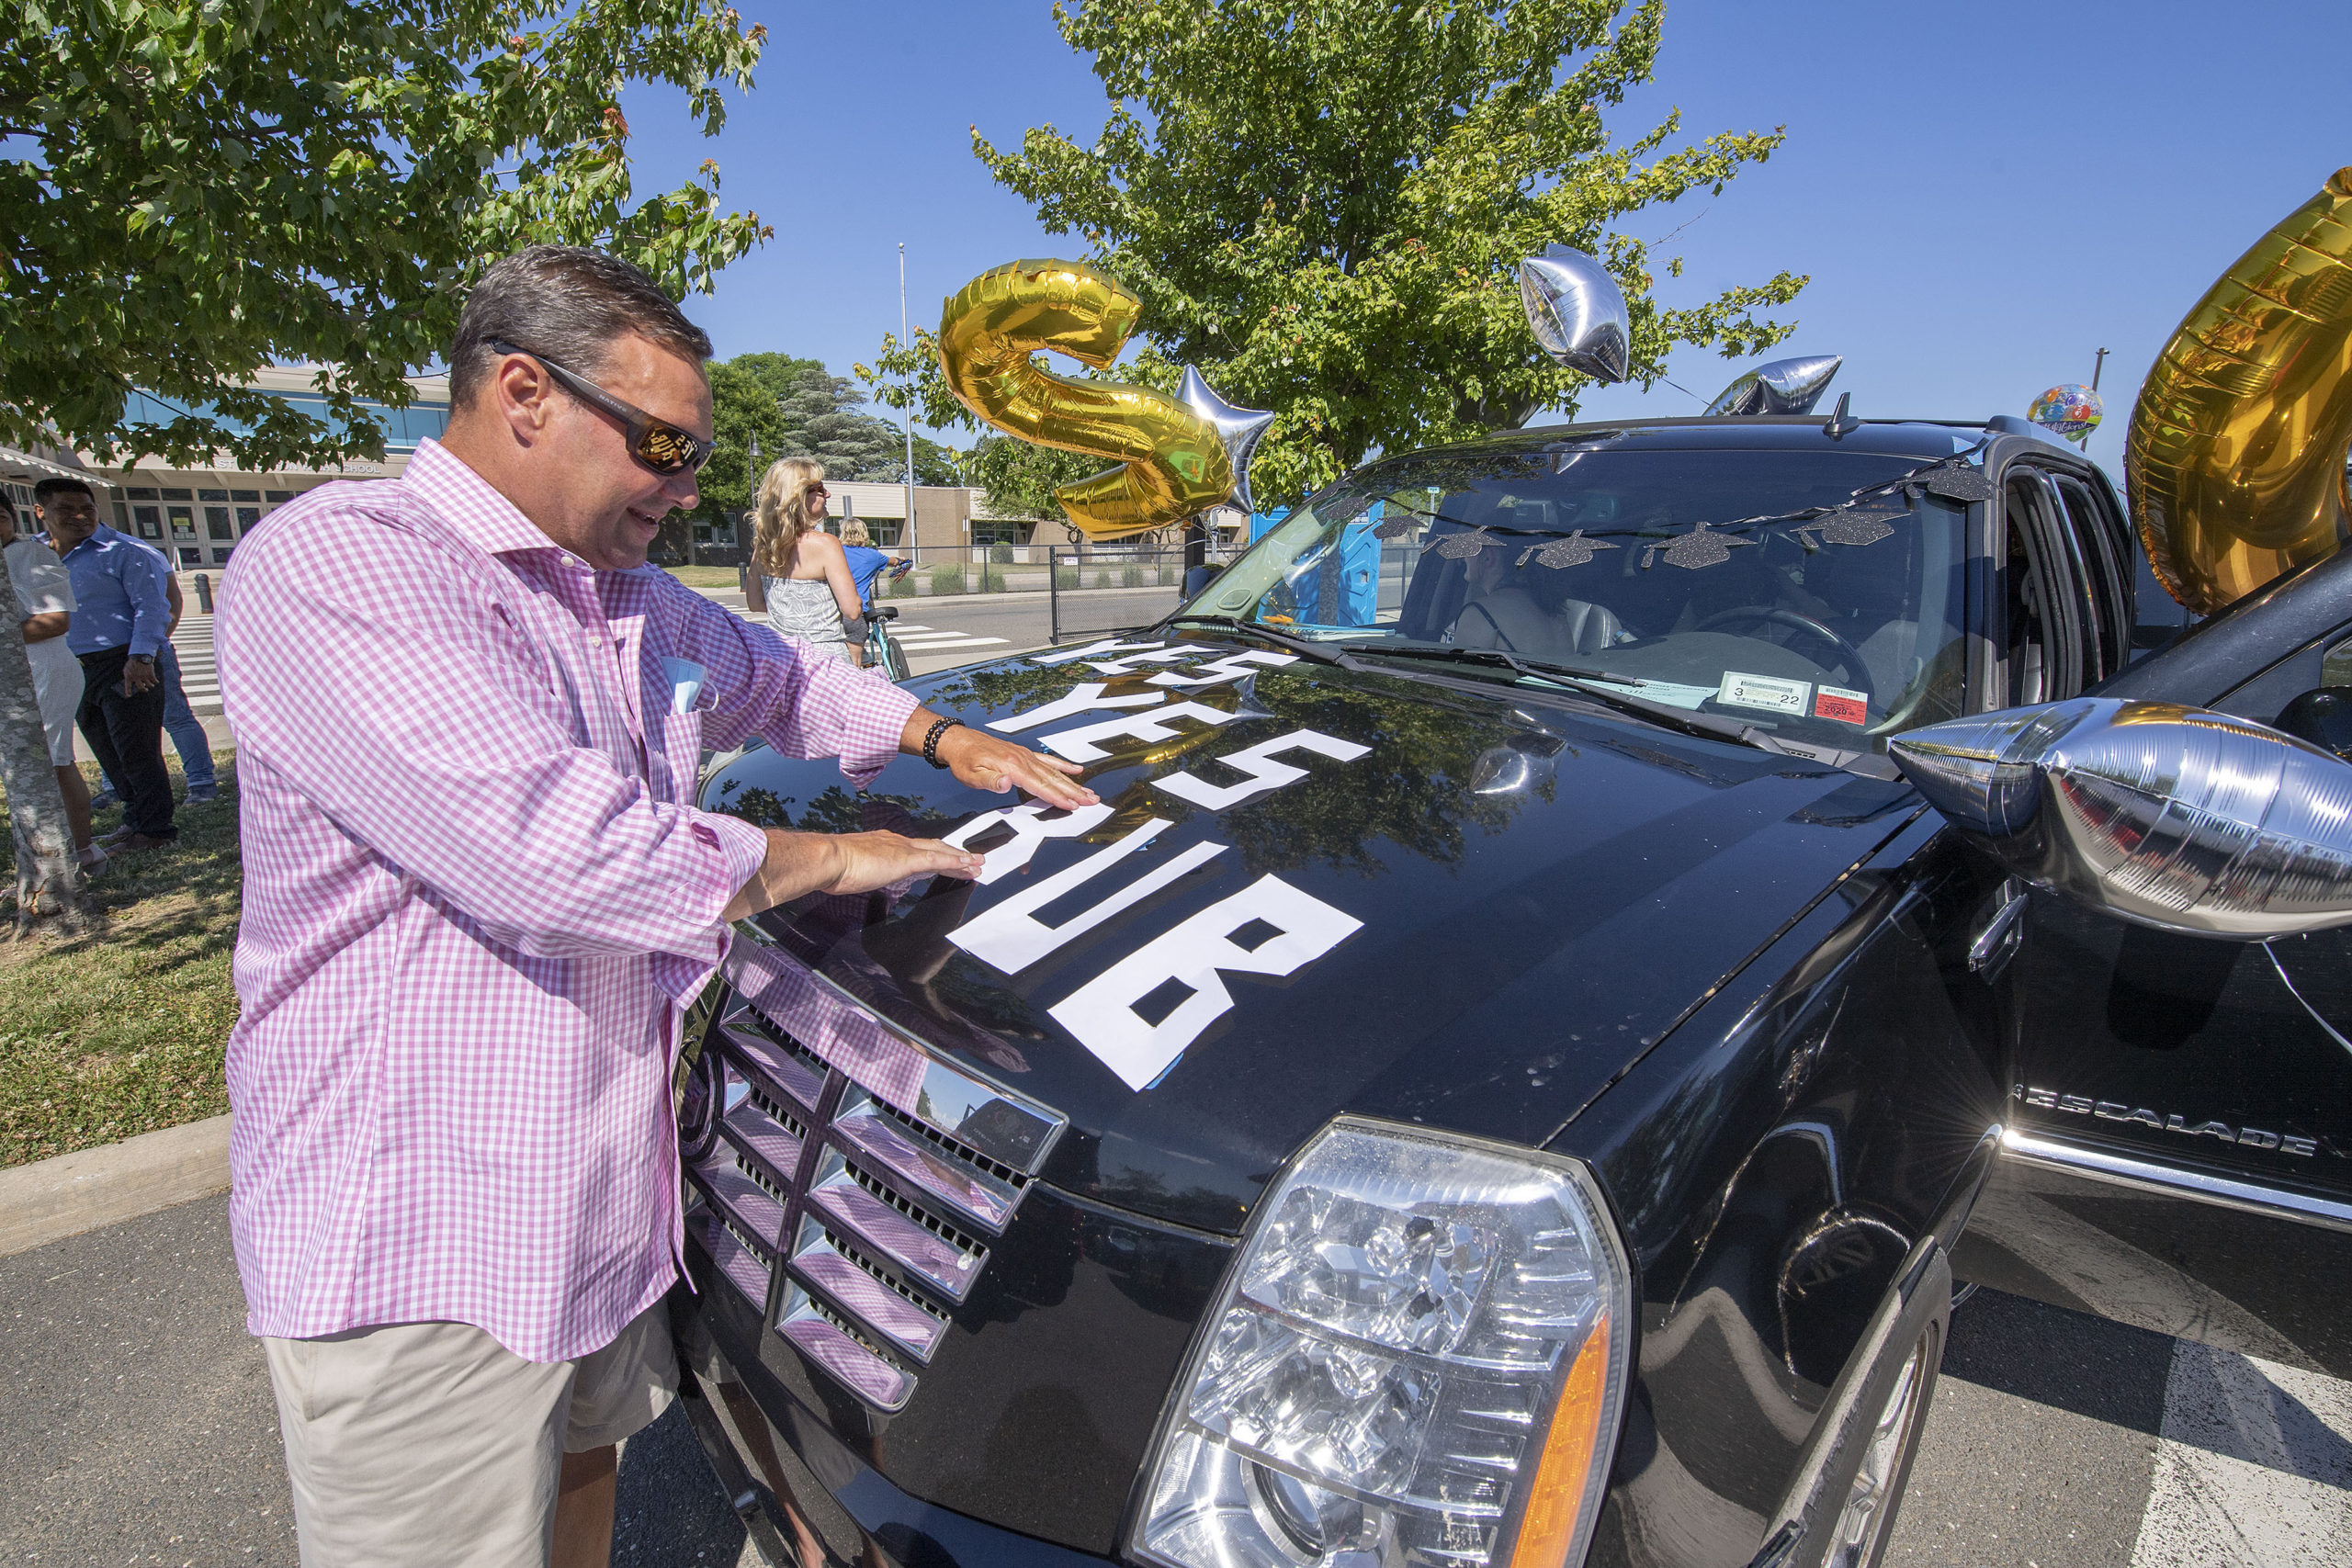 Brian Villante shows some Bonac pride as he decorates his car in the parking lot prior to the 2020 graduation ceremony at the East Hampton High School on Friday.